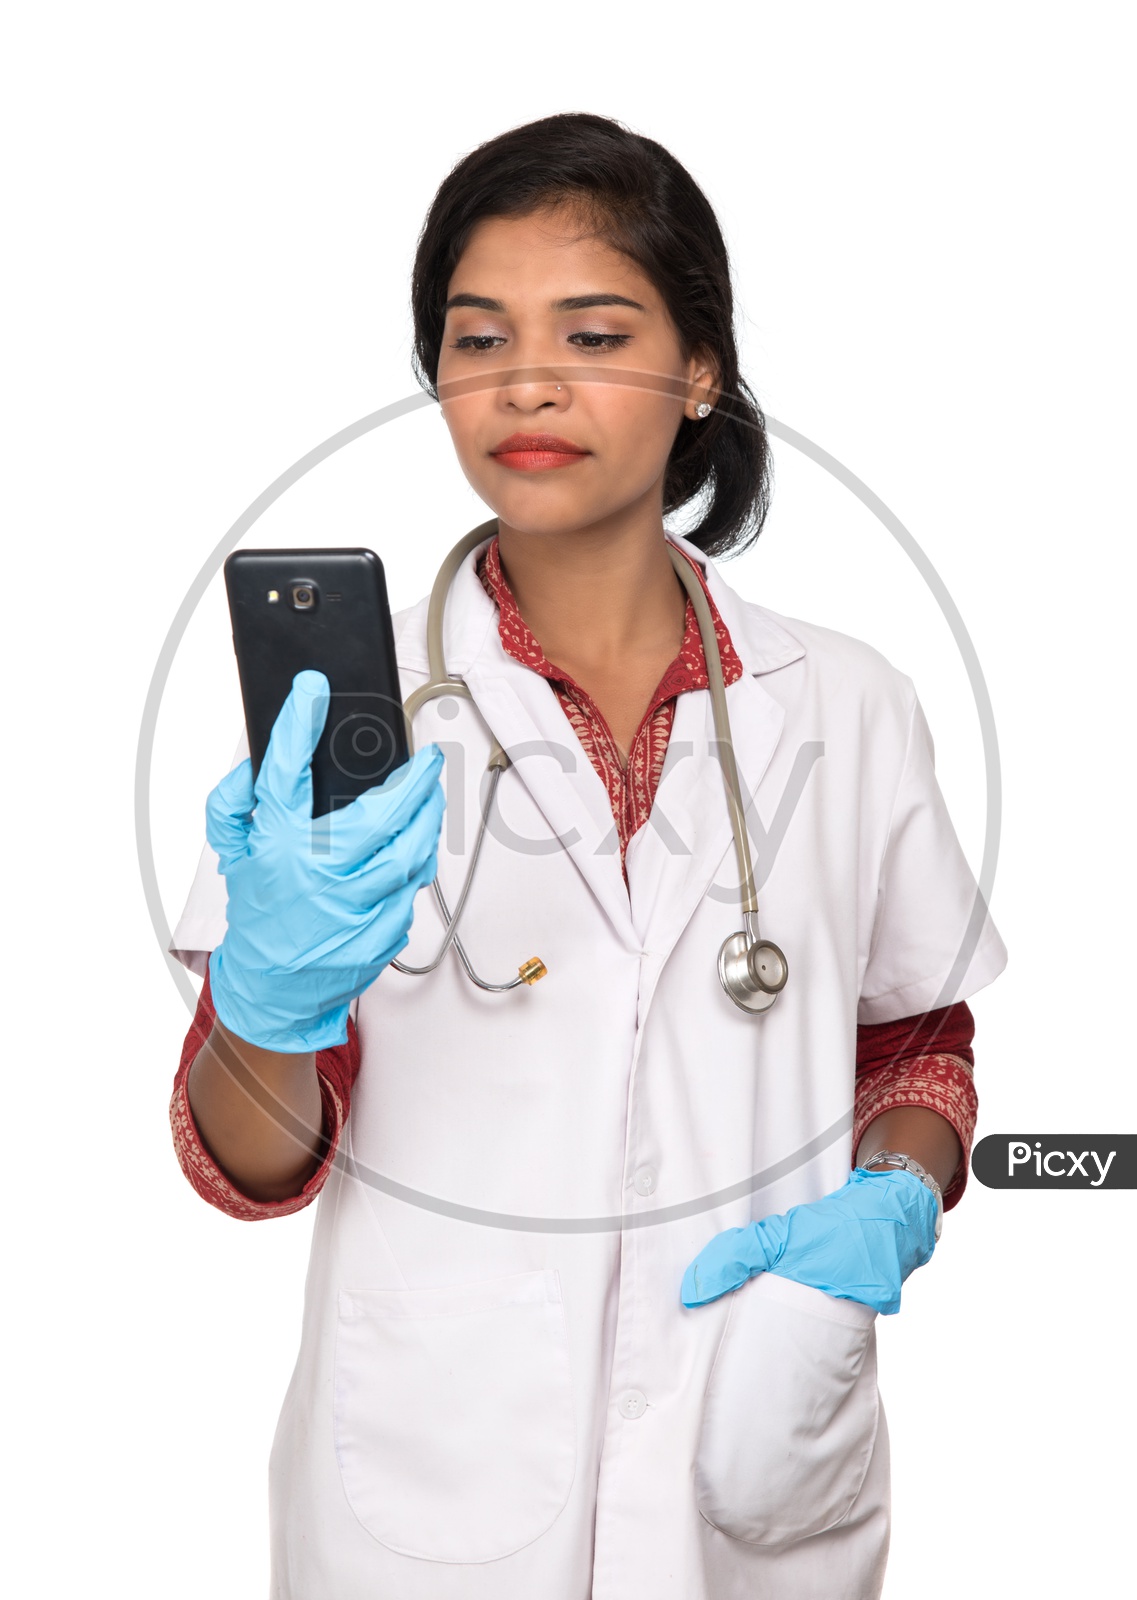 Indian Female Doctor checking her phone